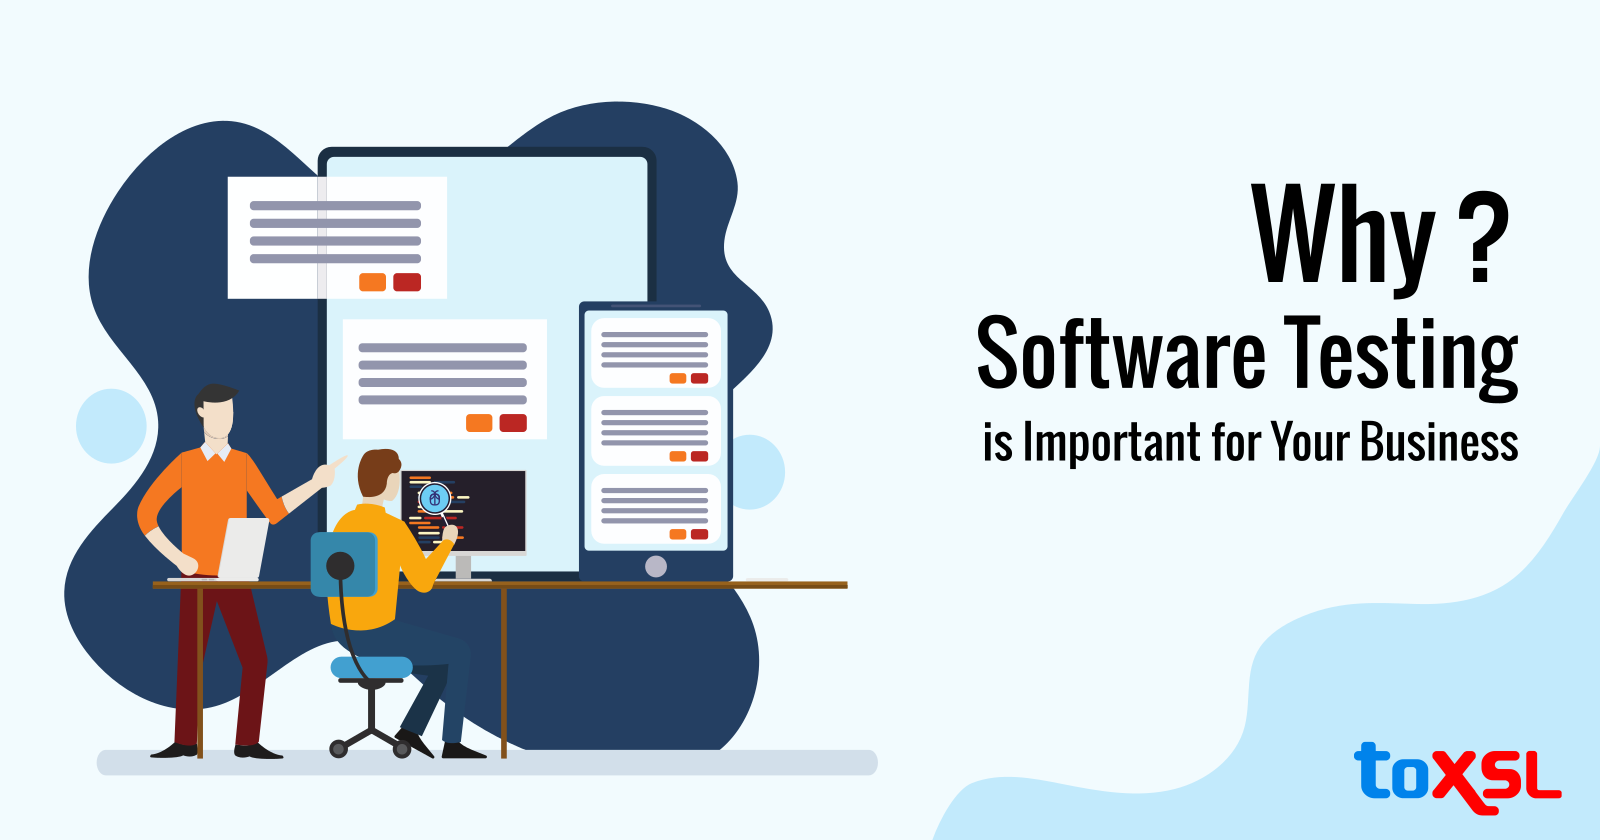 Why Software Testing is Important for Your Business